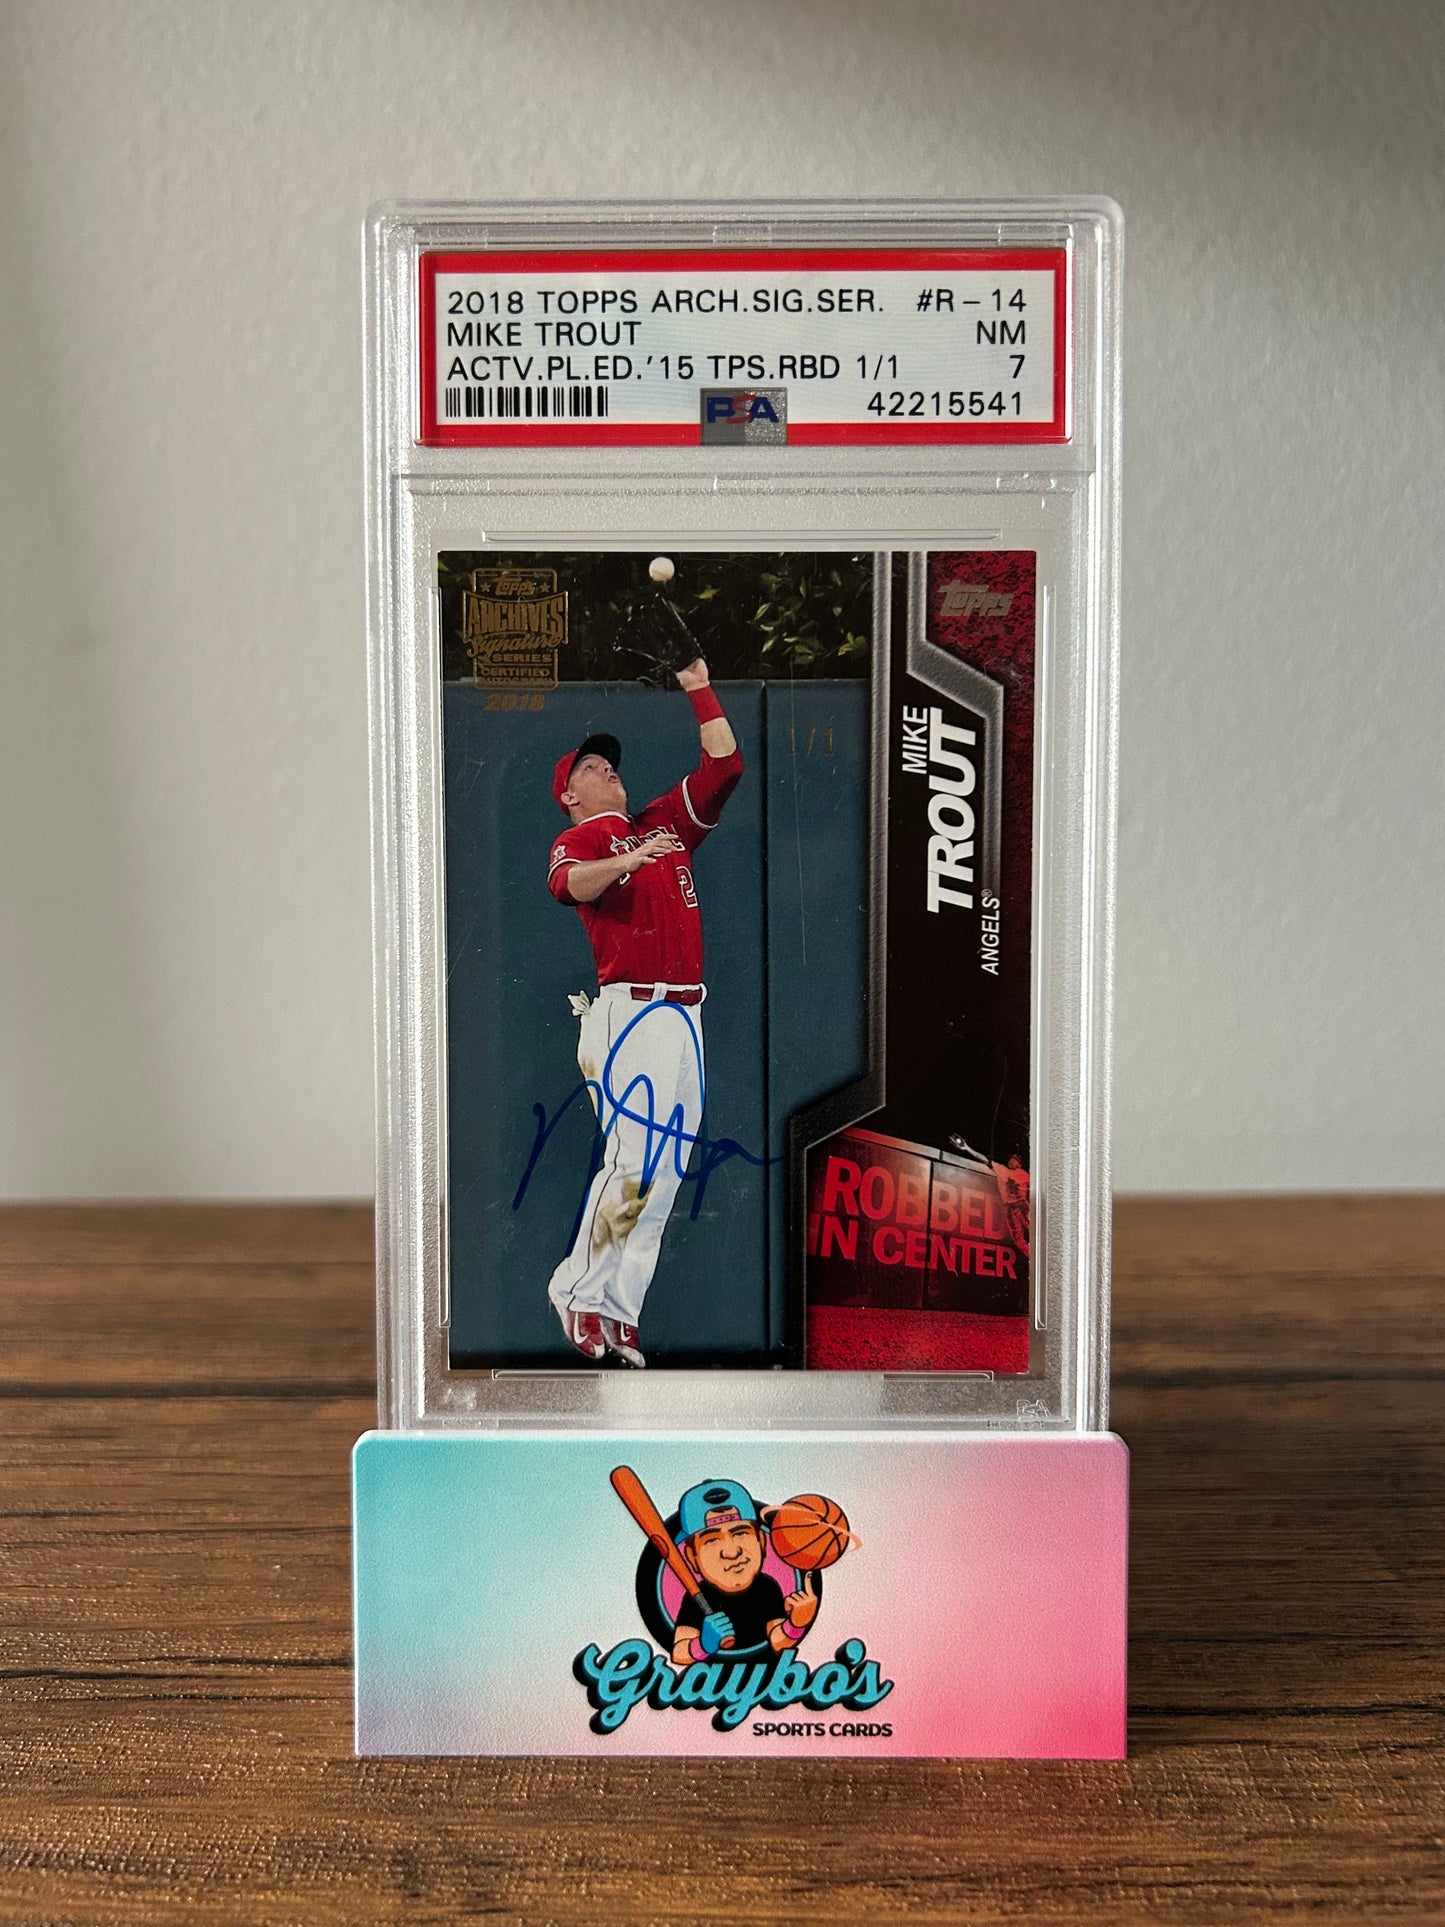 2018 Topps Arch. Sig. Ser. Mike Trout Actv. PL. ED. '15 TPS. RBD 1/1 #R-14 PSA 7